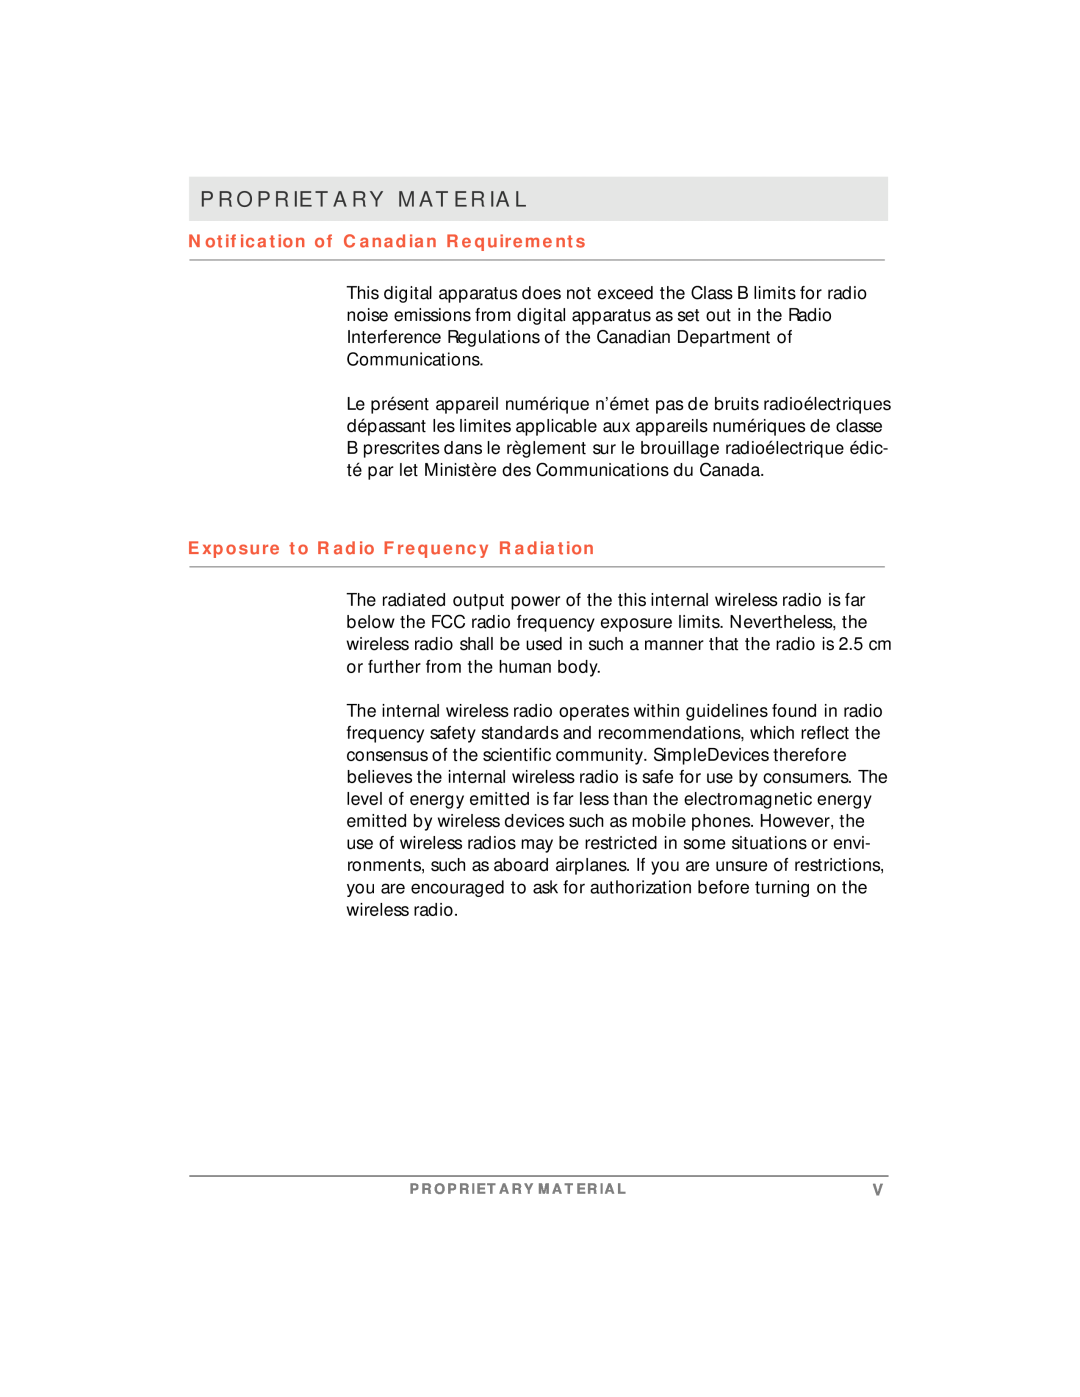 Motorola simplefi manual Notification of Canadian Requirements, Exposure to Radio Frequency Radiation, Proprietary Material 